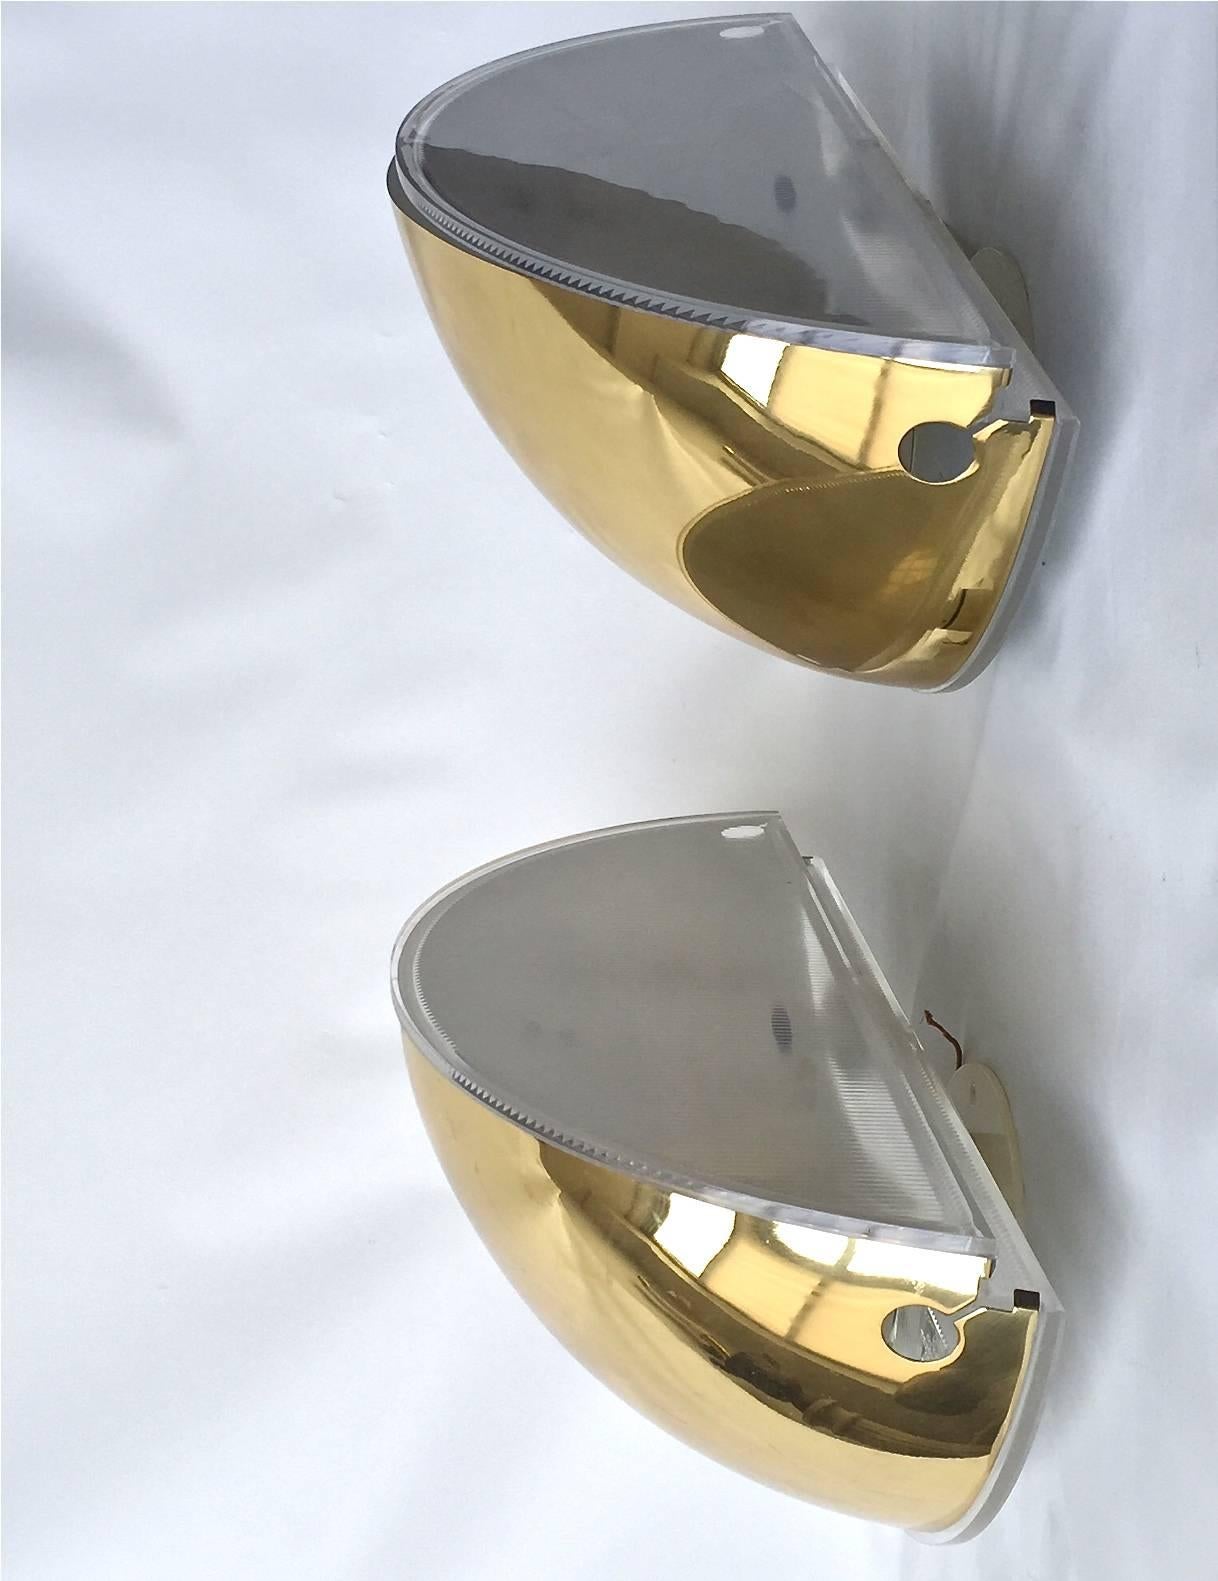 A Pair of extra large wall lights  designed by Tobia Scarpa, produced by Flos, Circa 1970th.
 Uplight wall light with curved polished  brass shades and plastic diffuser. W -16